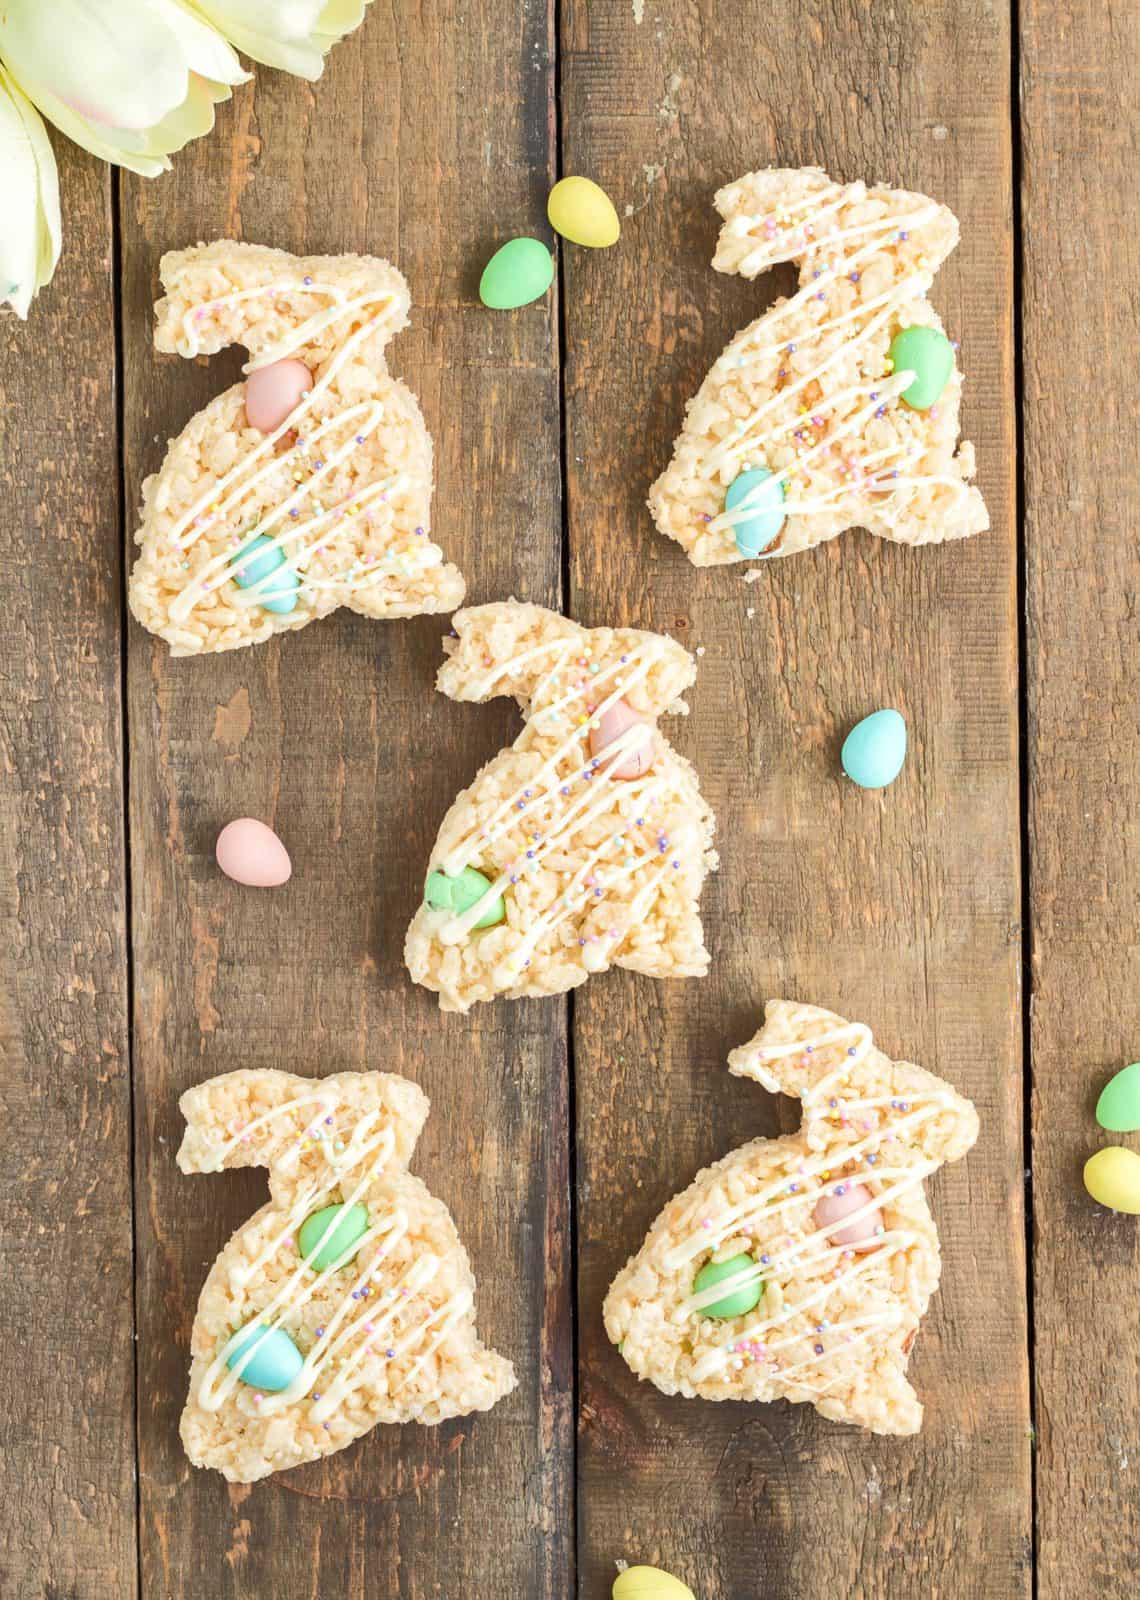 Easter Bunny Rice Krispies Treats laying out on wooden board with some mini cadbury eggs.